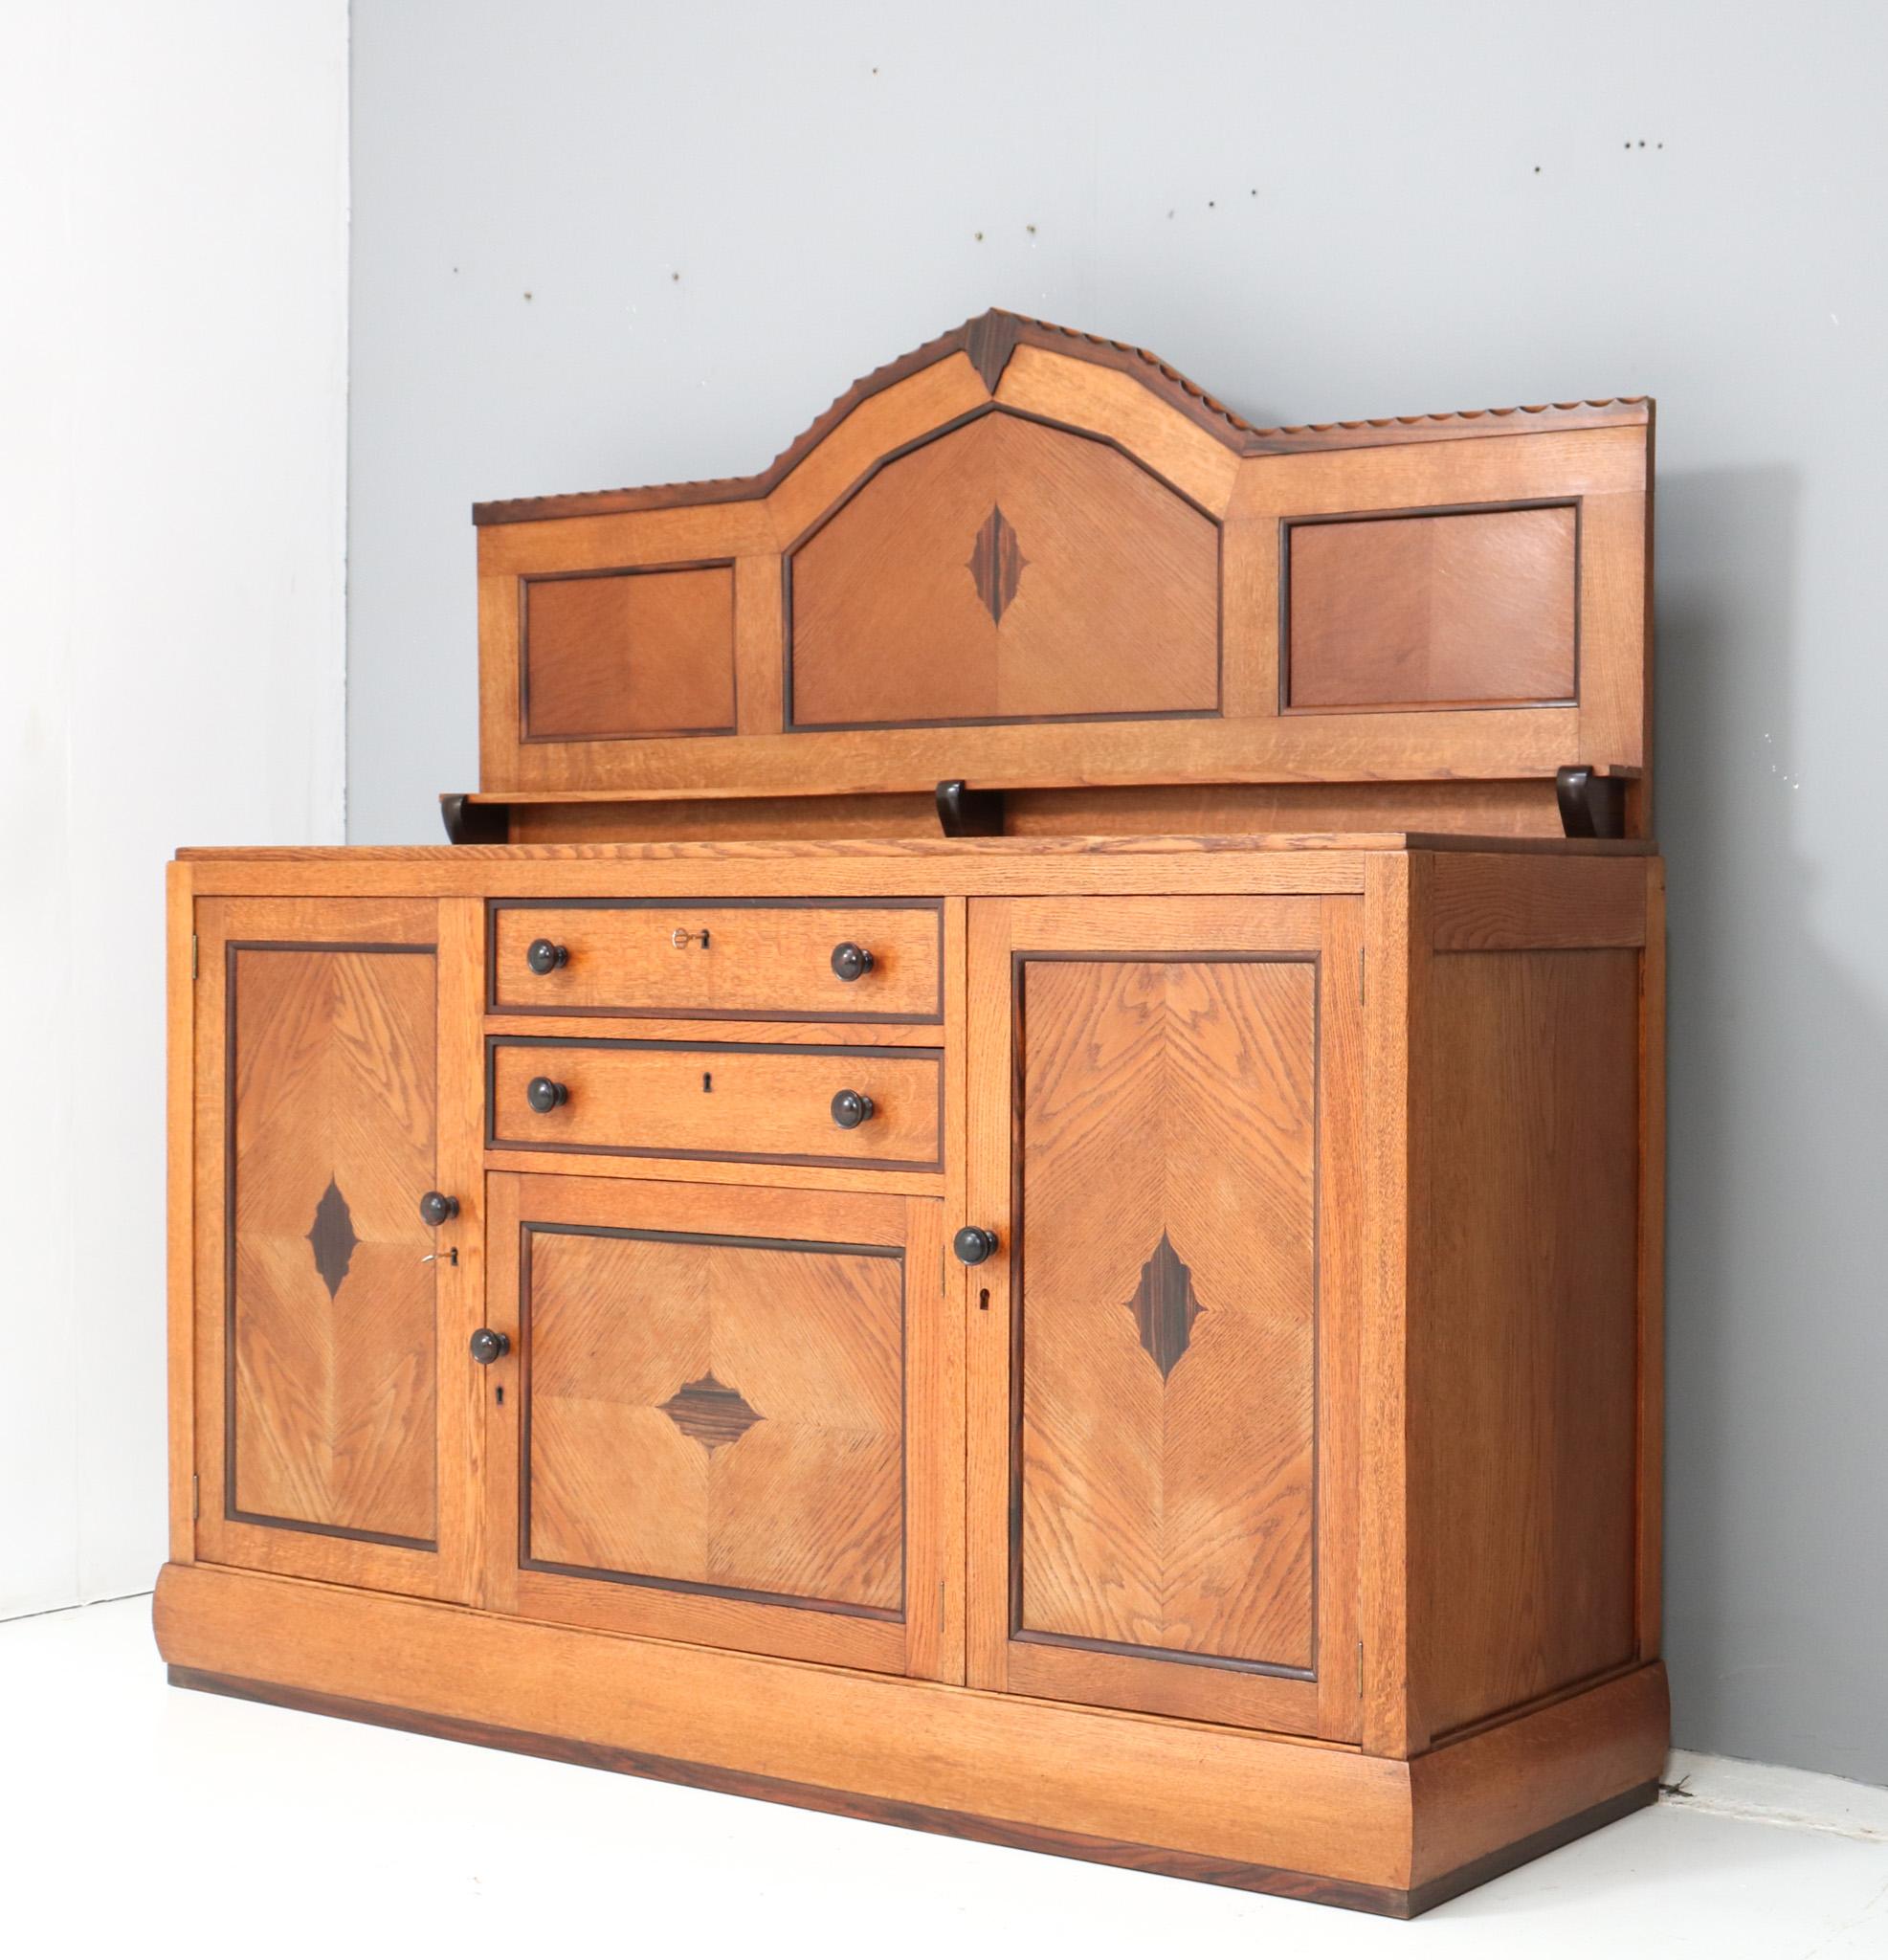 Stunning and rare Art Deco Amsterdamse School credenza or sideboard.
Design by Fa. Drilling Amsterdam.
Striking Dutch design from the 1920s.
Solid oak and macassar ebony base with solid macassar ebony knobs on doors and drawers.
The doors are